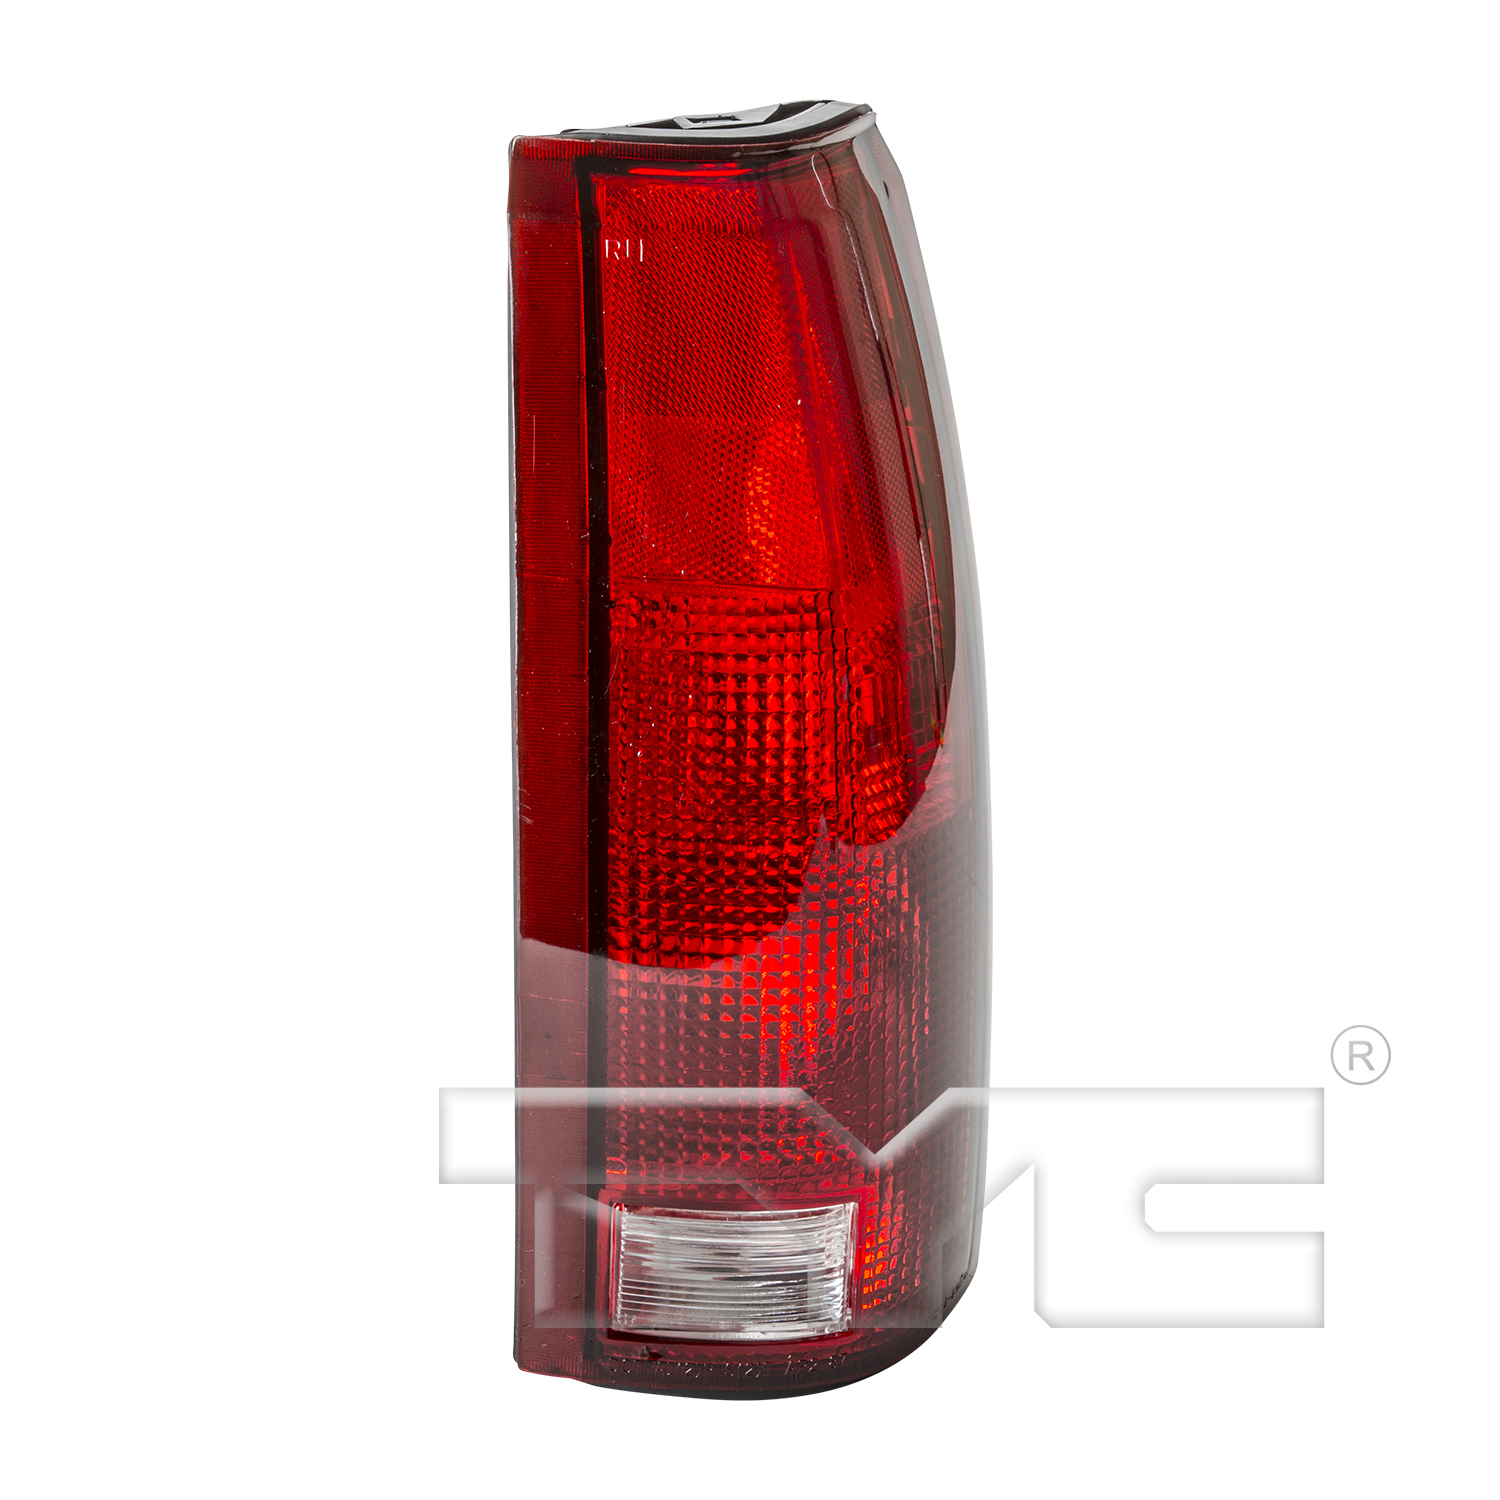 Aftermarket TAILLIGHTS for GMC - C1500, C1500,88-99,RT Taillamp lens